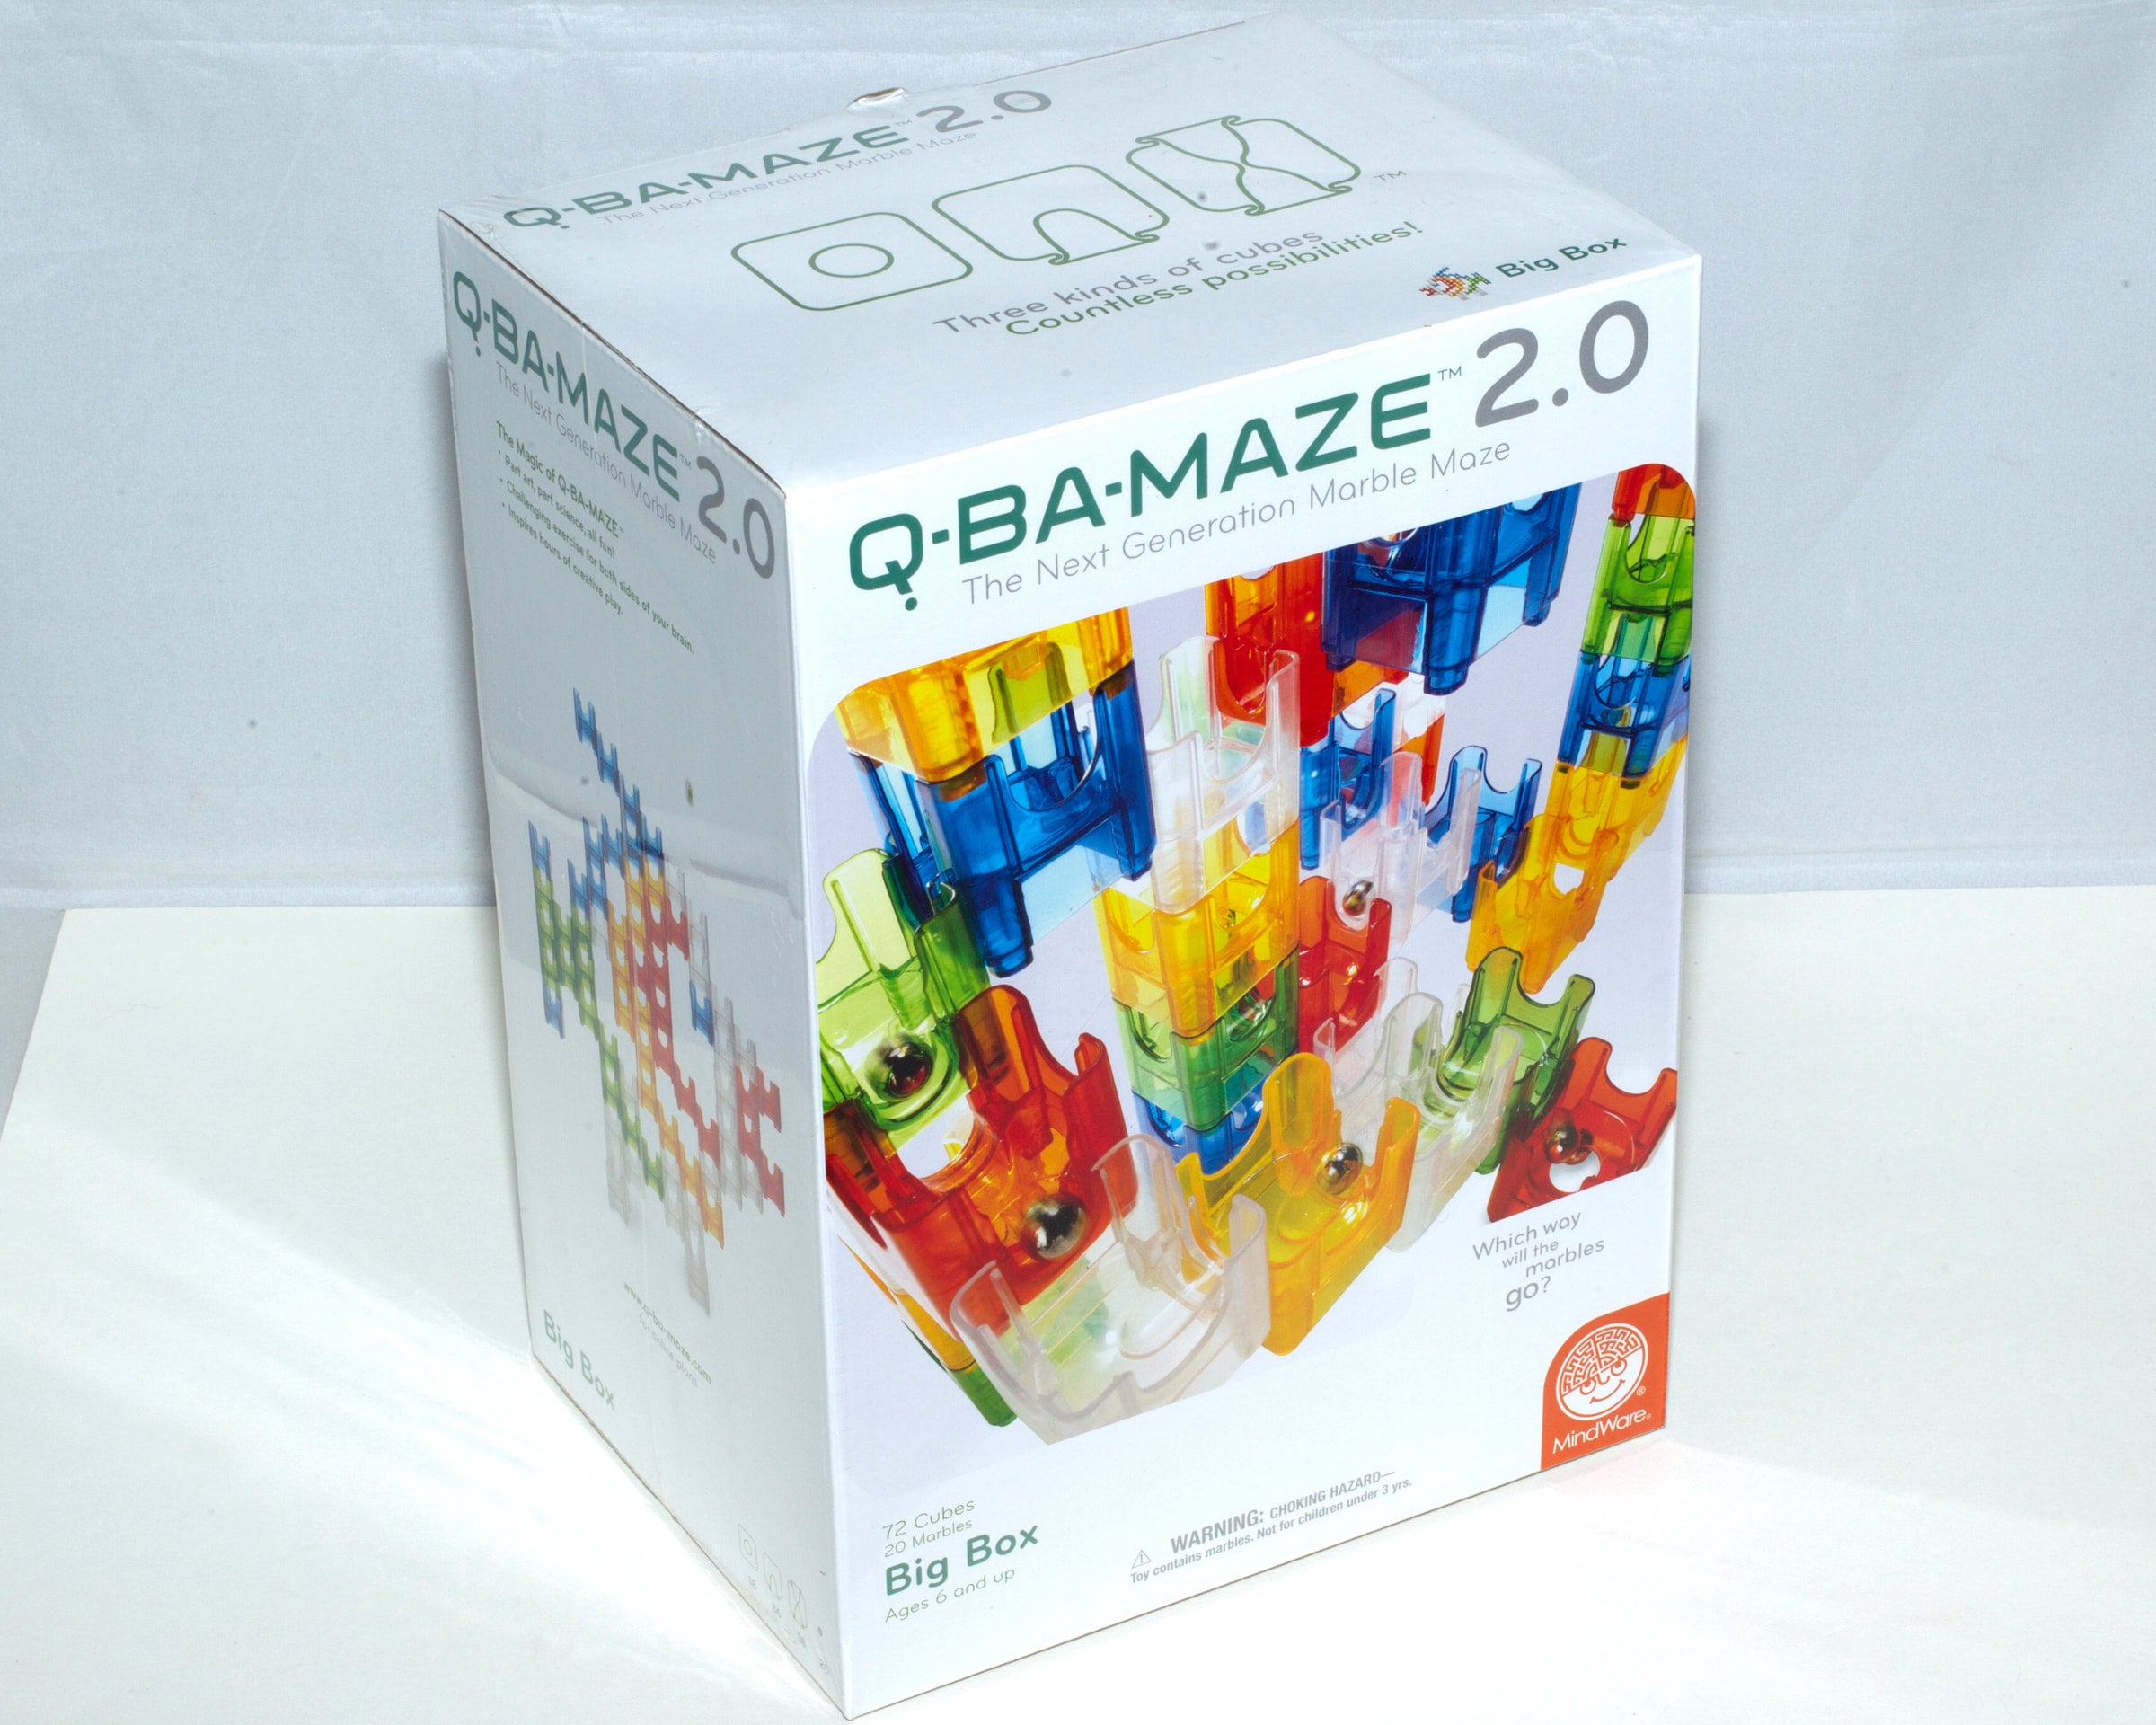 Toys As Tools Educational Toy Reviews: Review and Giveaway: Q-BA- Maze 2.0  Big Box: Toys that Enchant